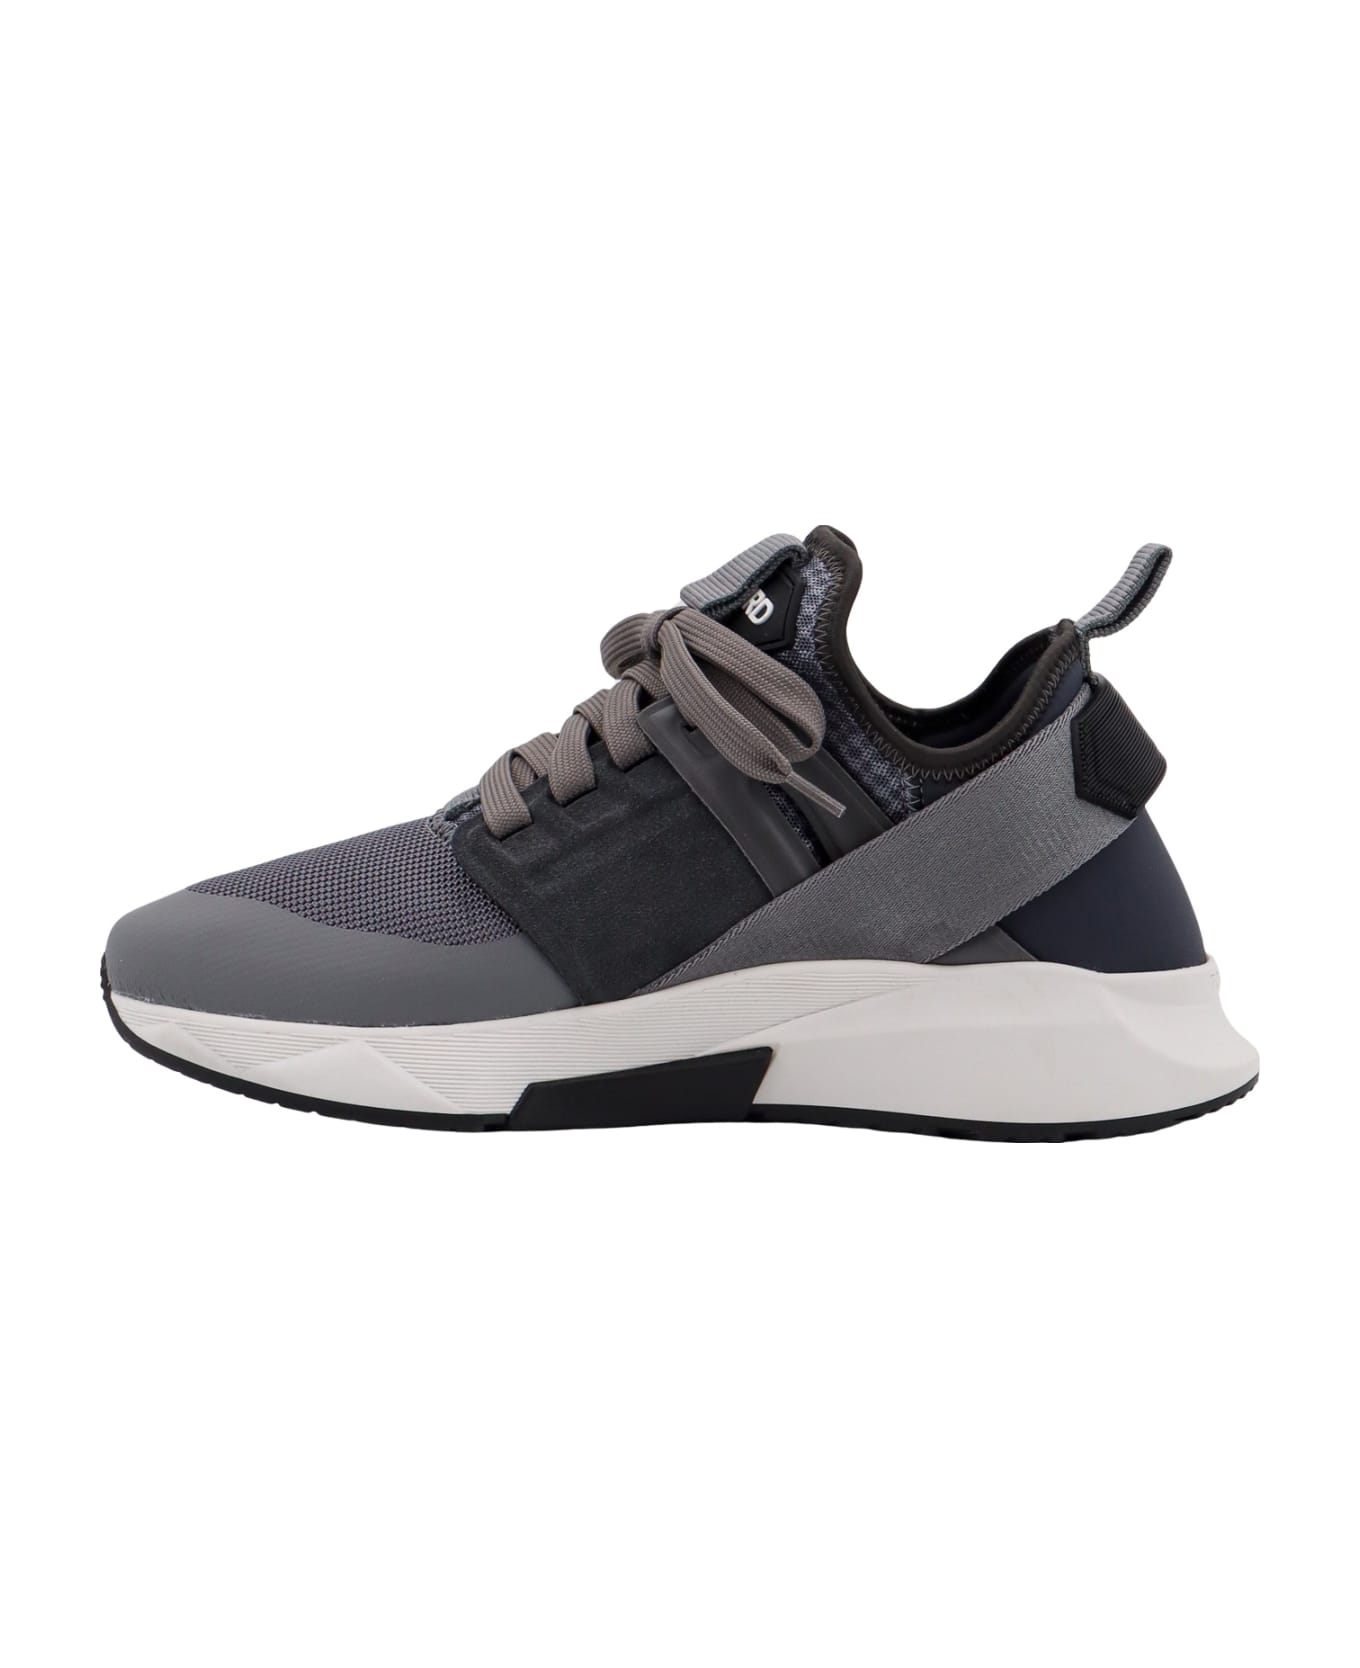 Tom Ford Jago Sneakers - Grey/white